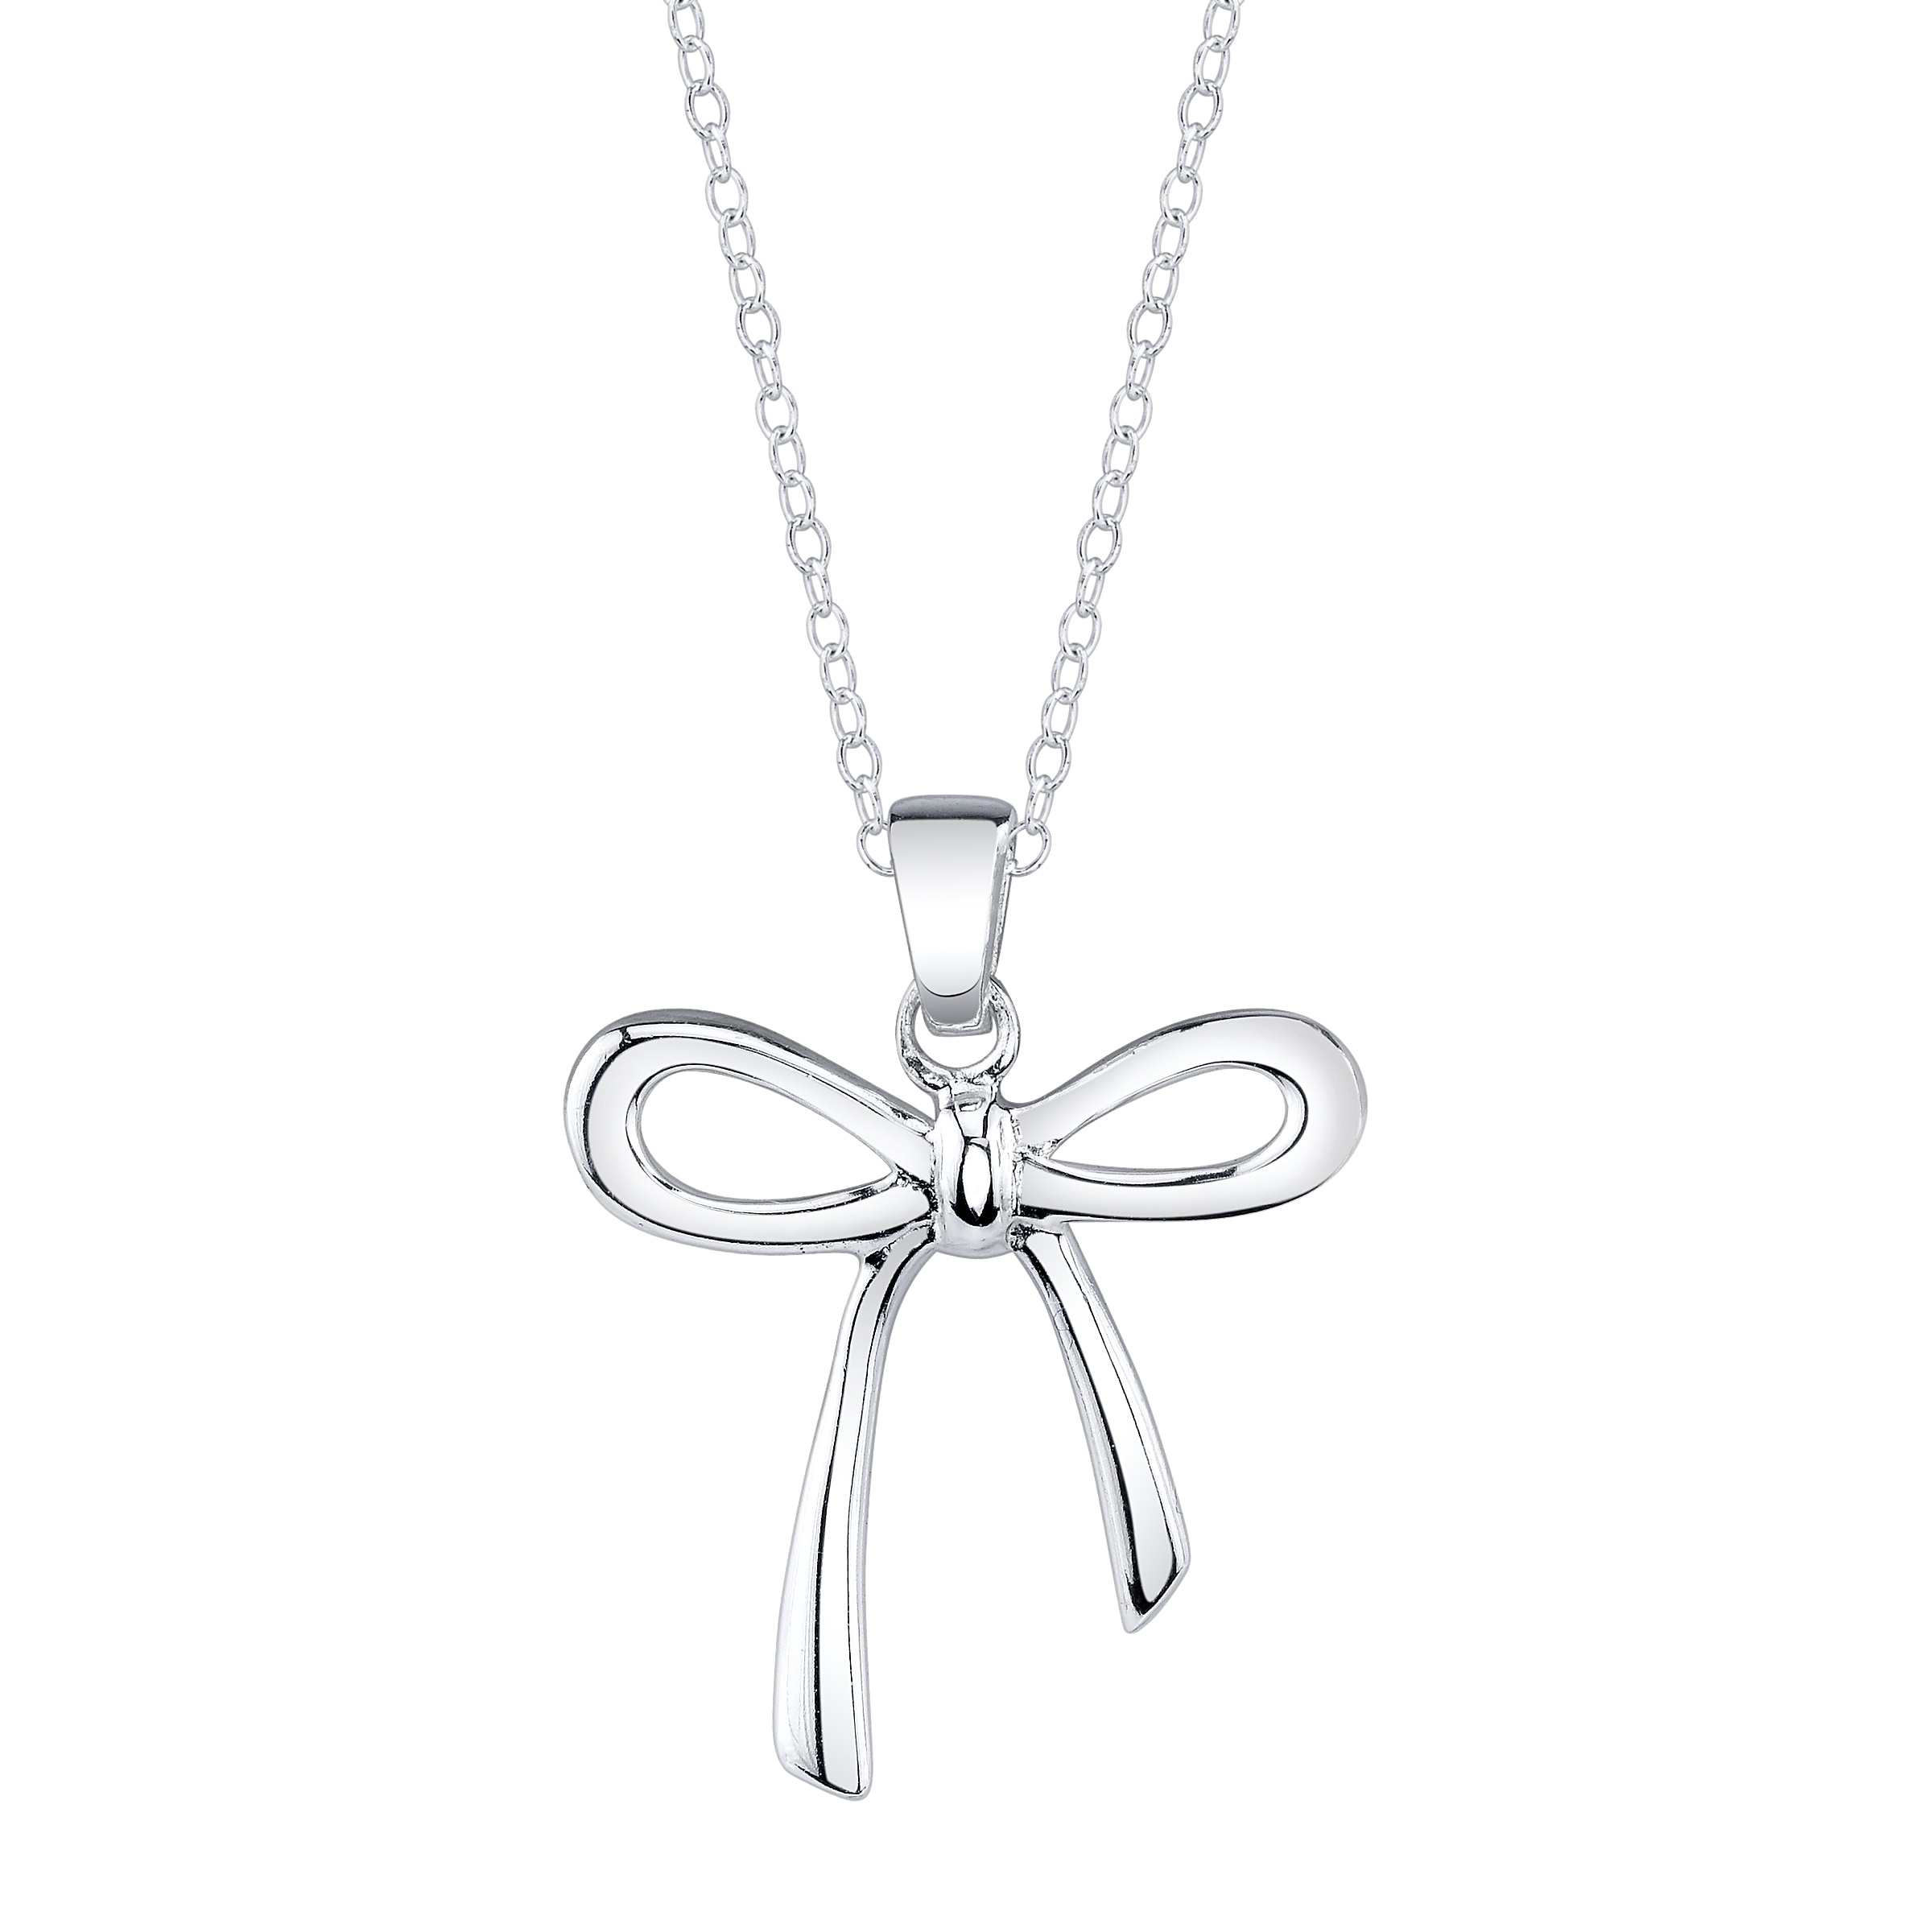 Shop Sterling Silver Open Bow Necklace - Free Shipping On Orders Over ...